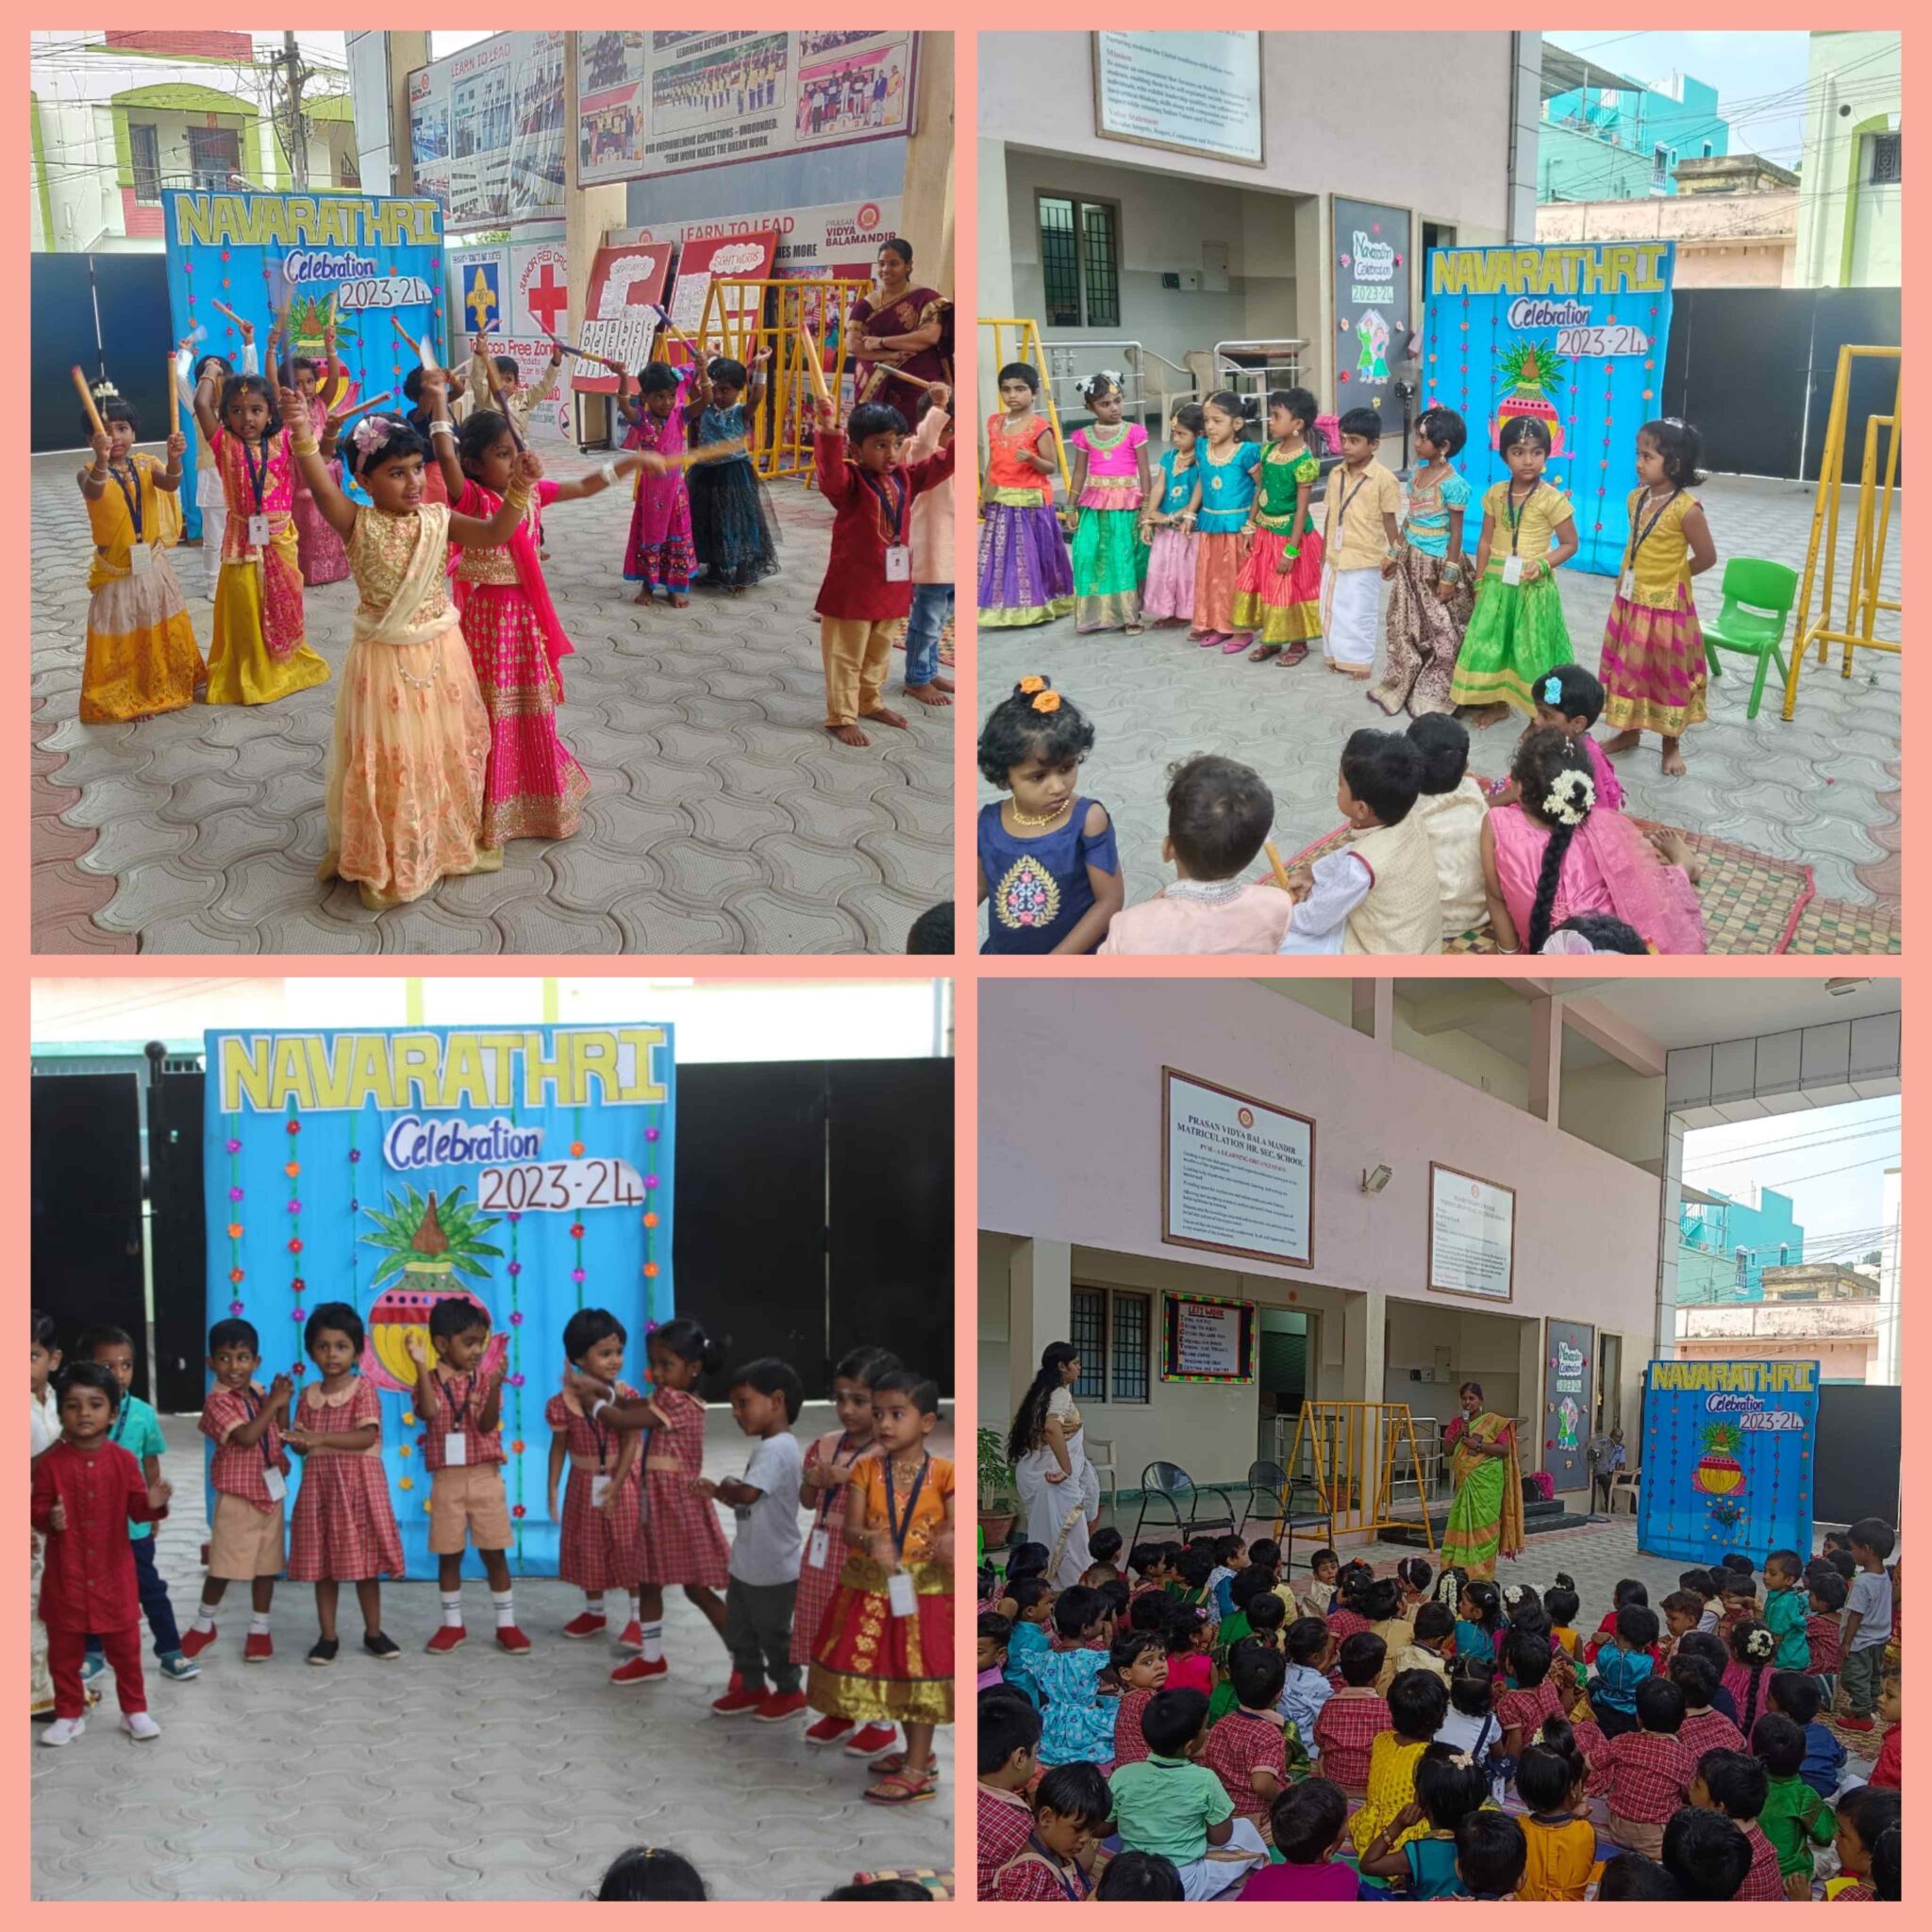 Kids-celebrating the occasion of navaratri by dance and song